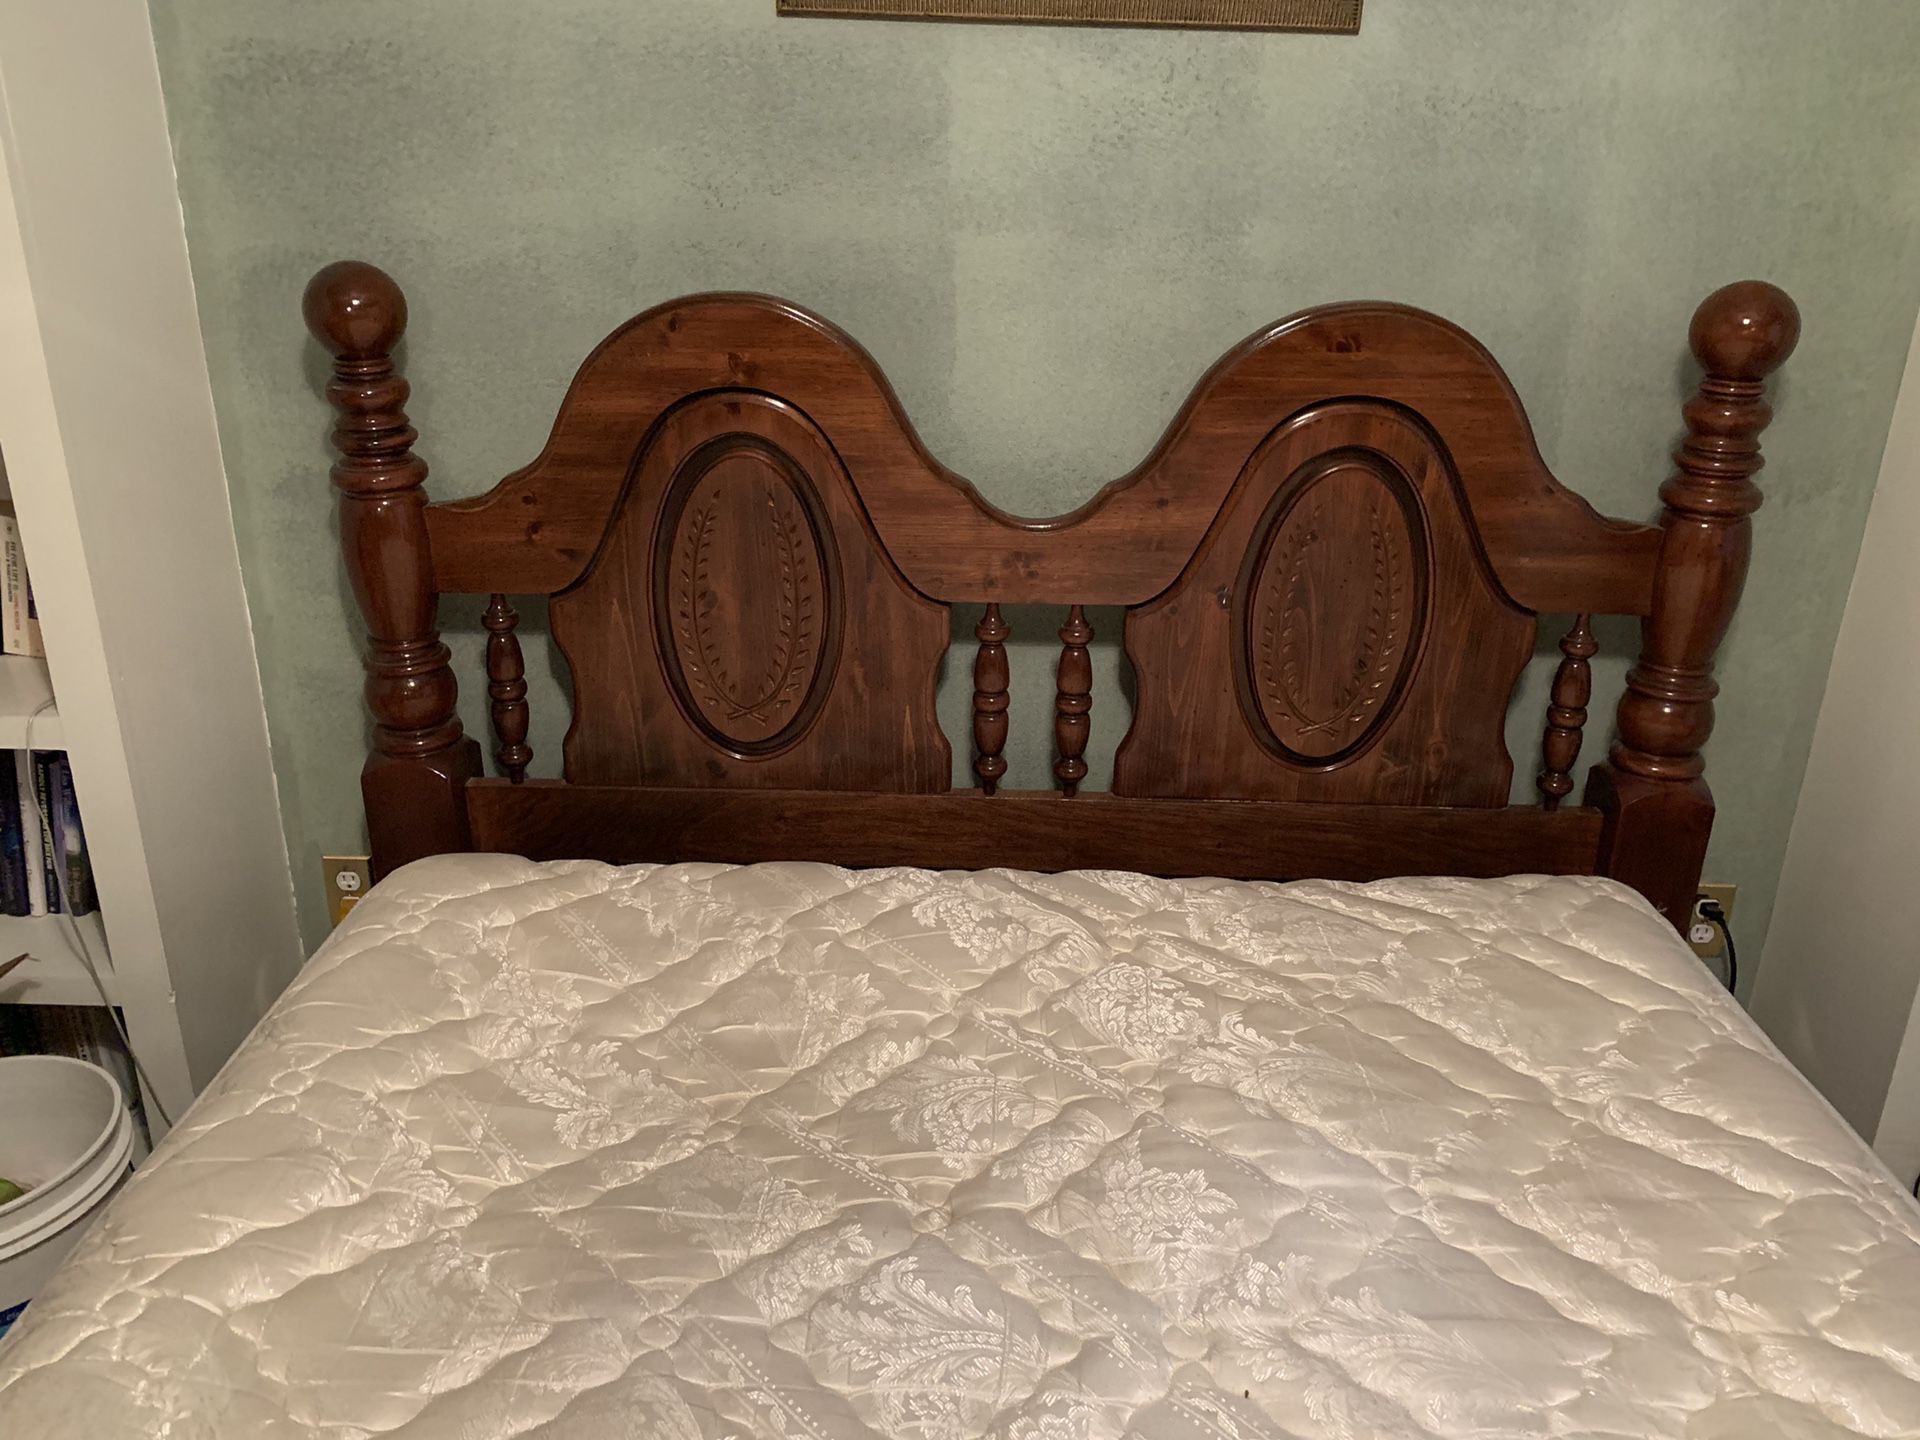 Queen size wood headboard and queen waterbed with bed frame. Waterbed has 8 individual tubes instead of 1 big bladder. Good condition.